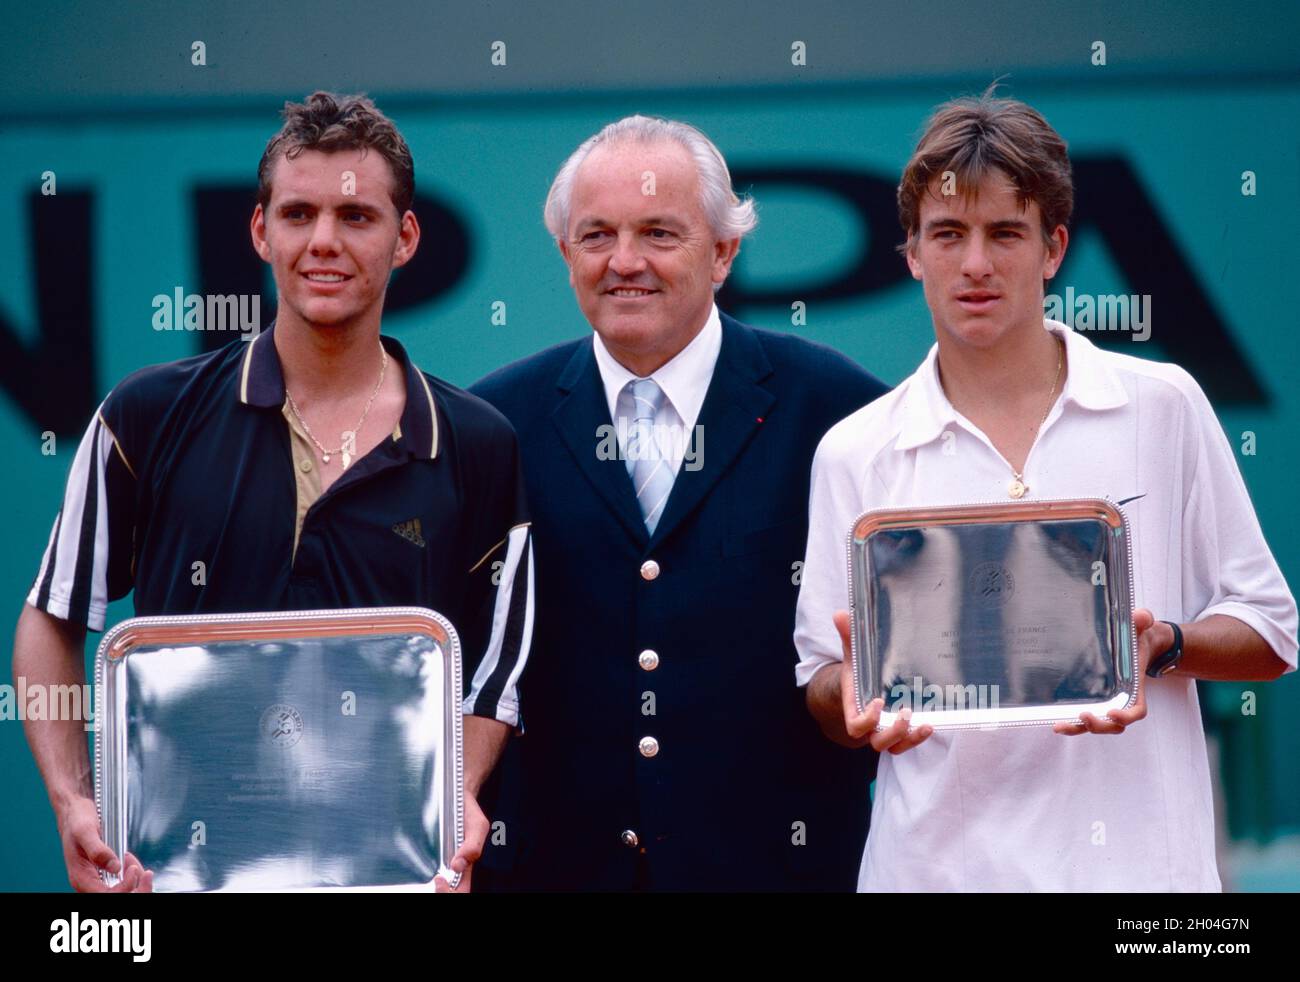 French tennis player Paul-Henri Mathieu and Spanish tennis player Tommy Robredo, Roland Garros, France 2000 Stock Photo